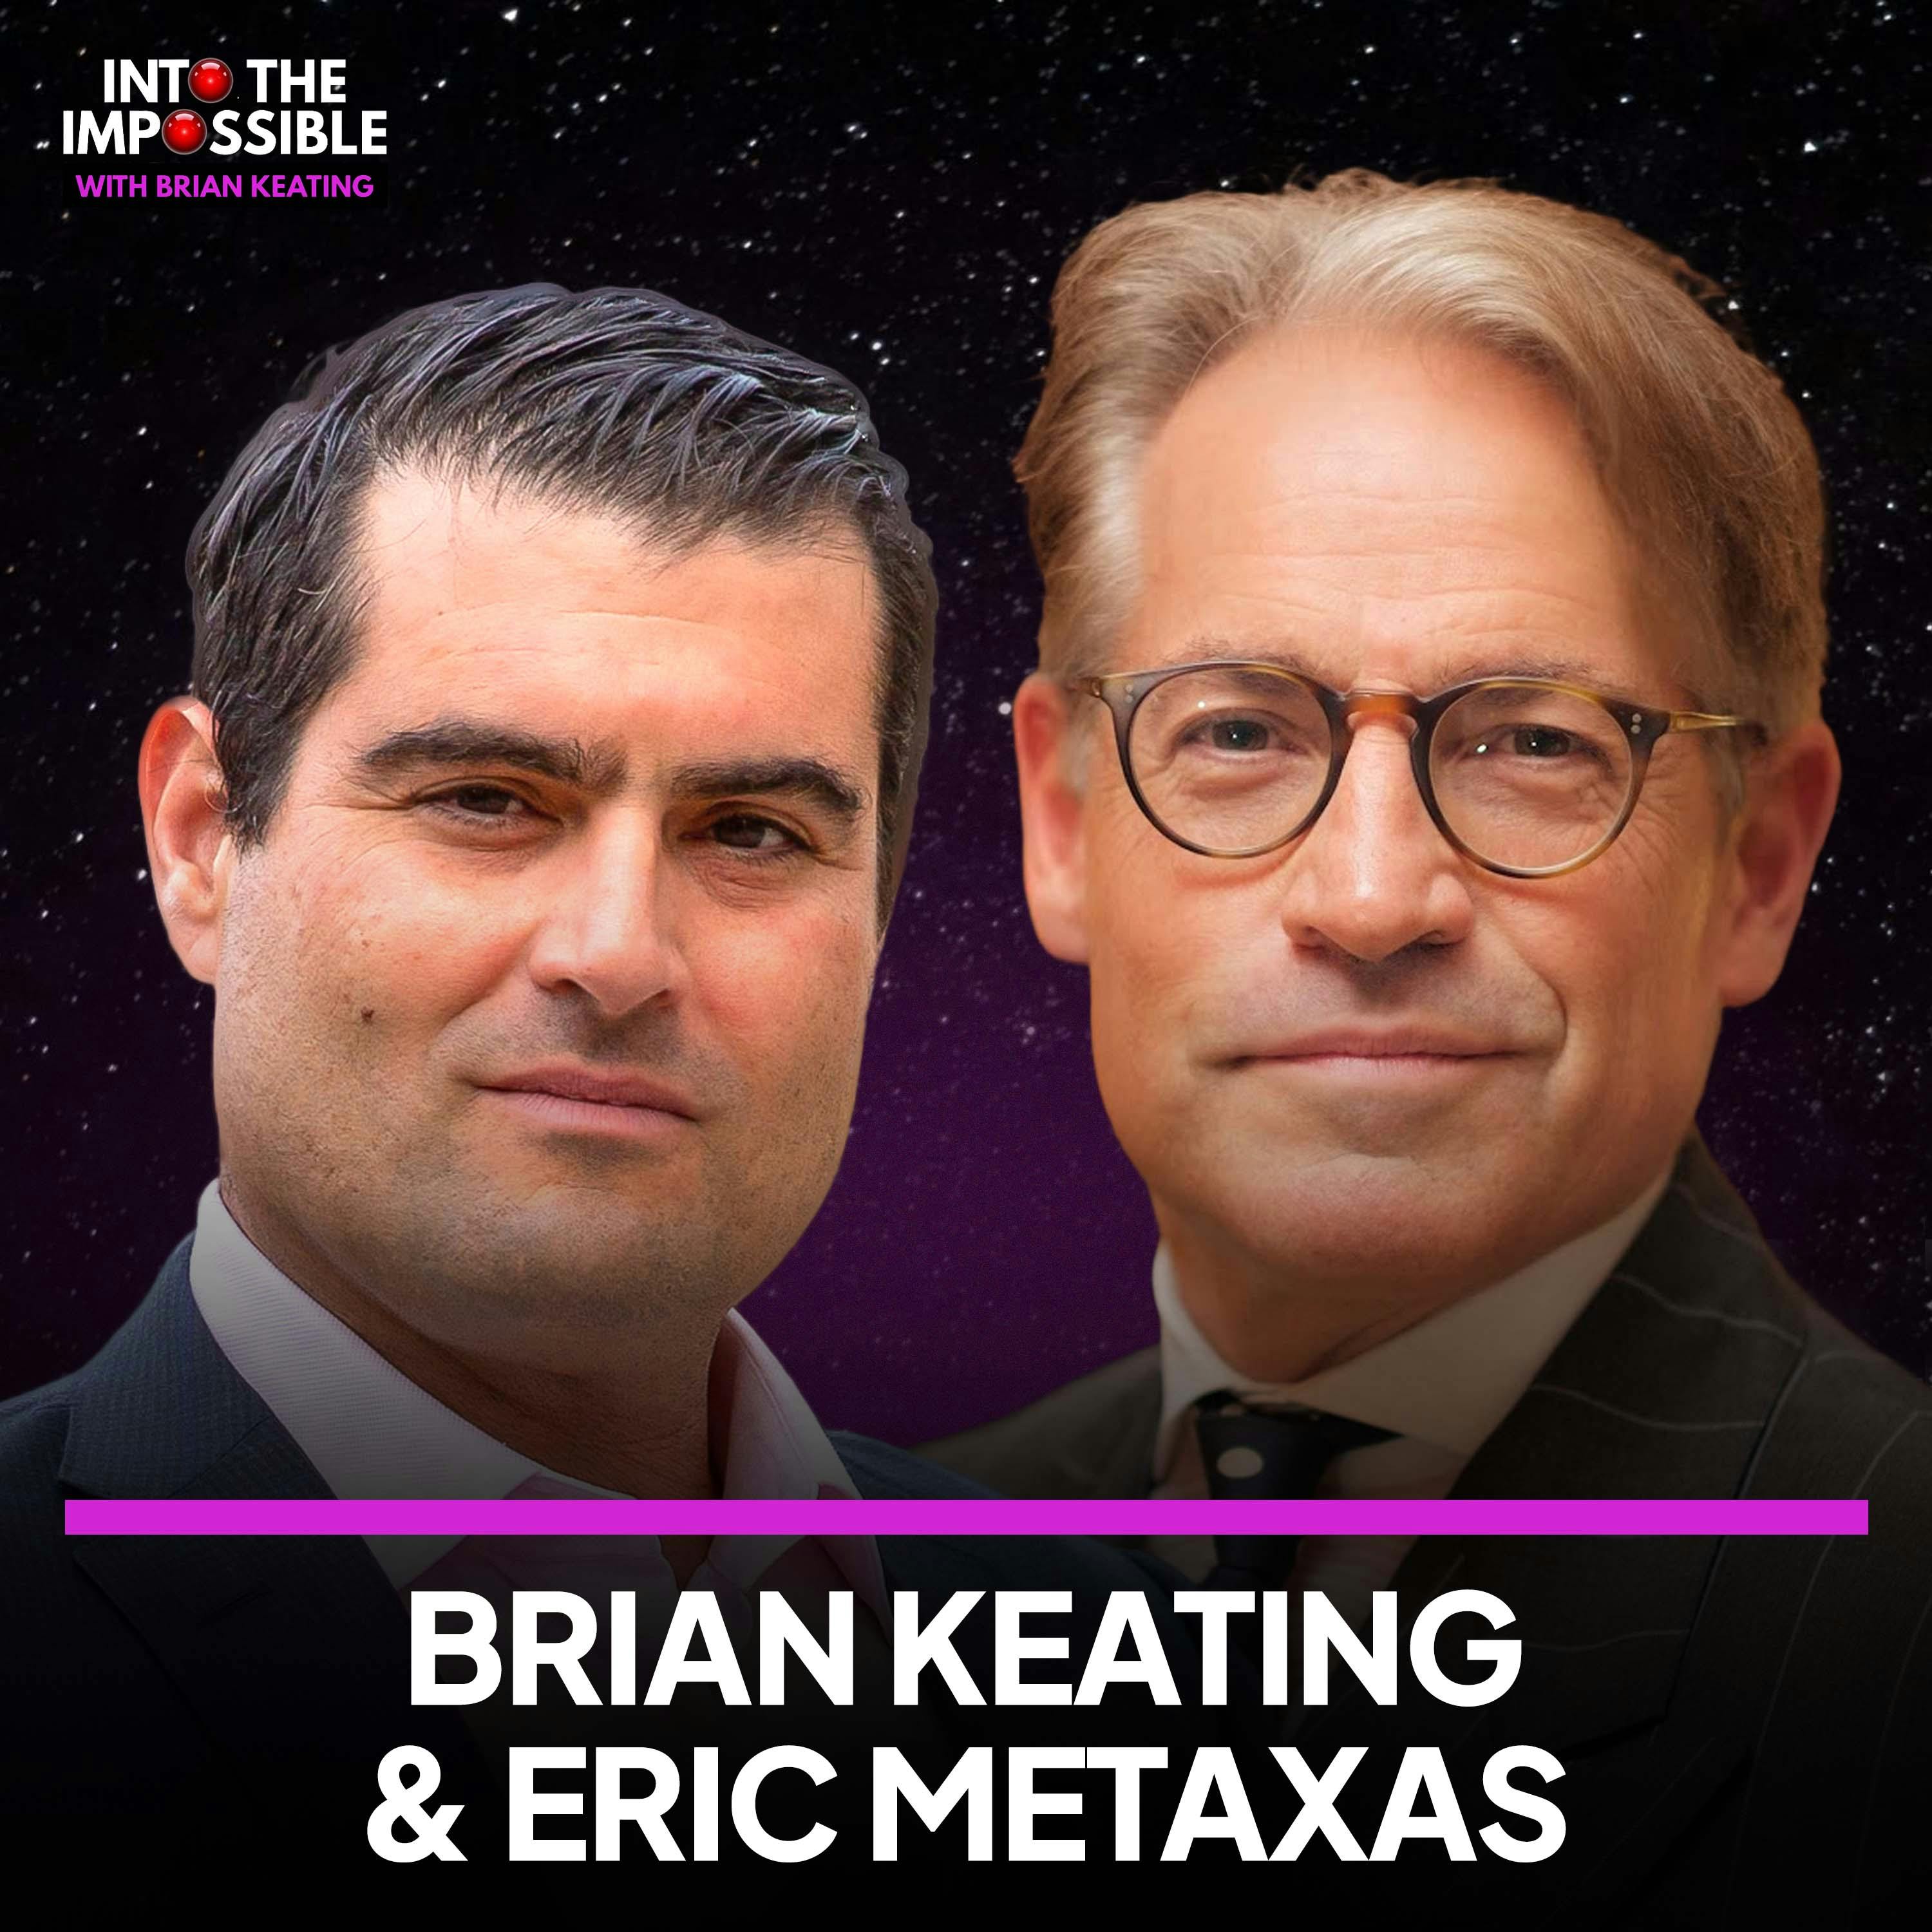 Brian Keating Discusses the Meaning of Life and Science With Eric Metaxas